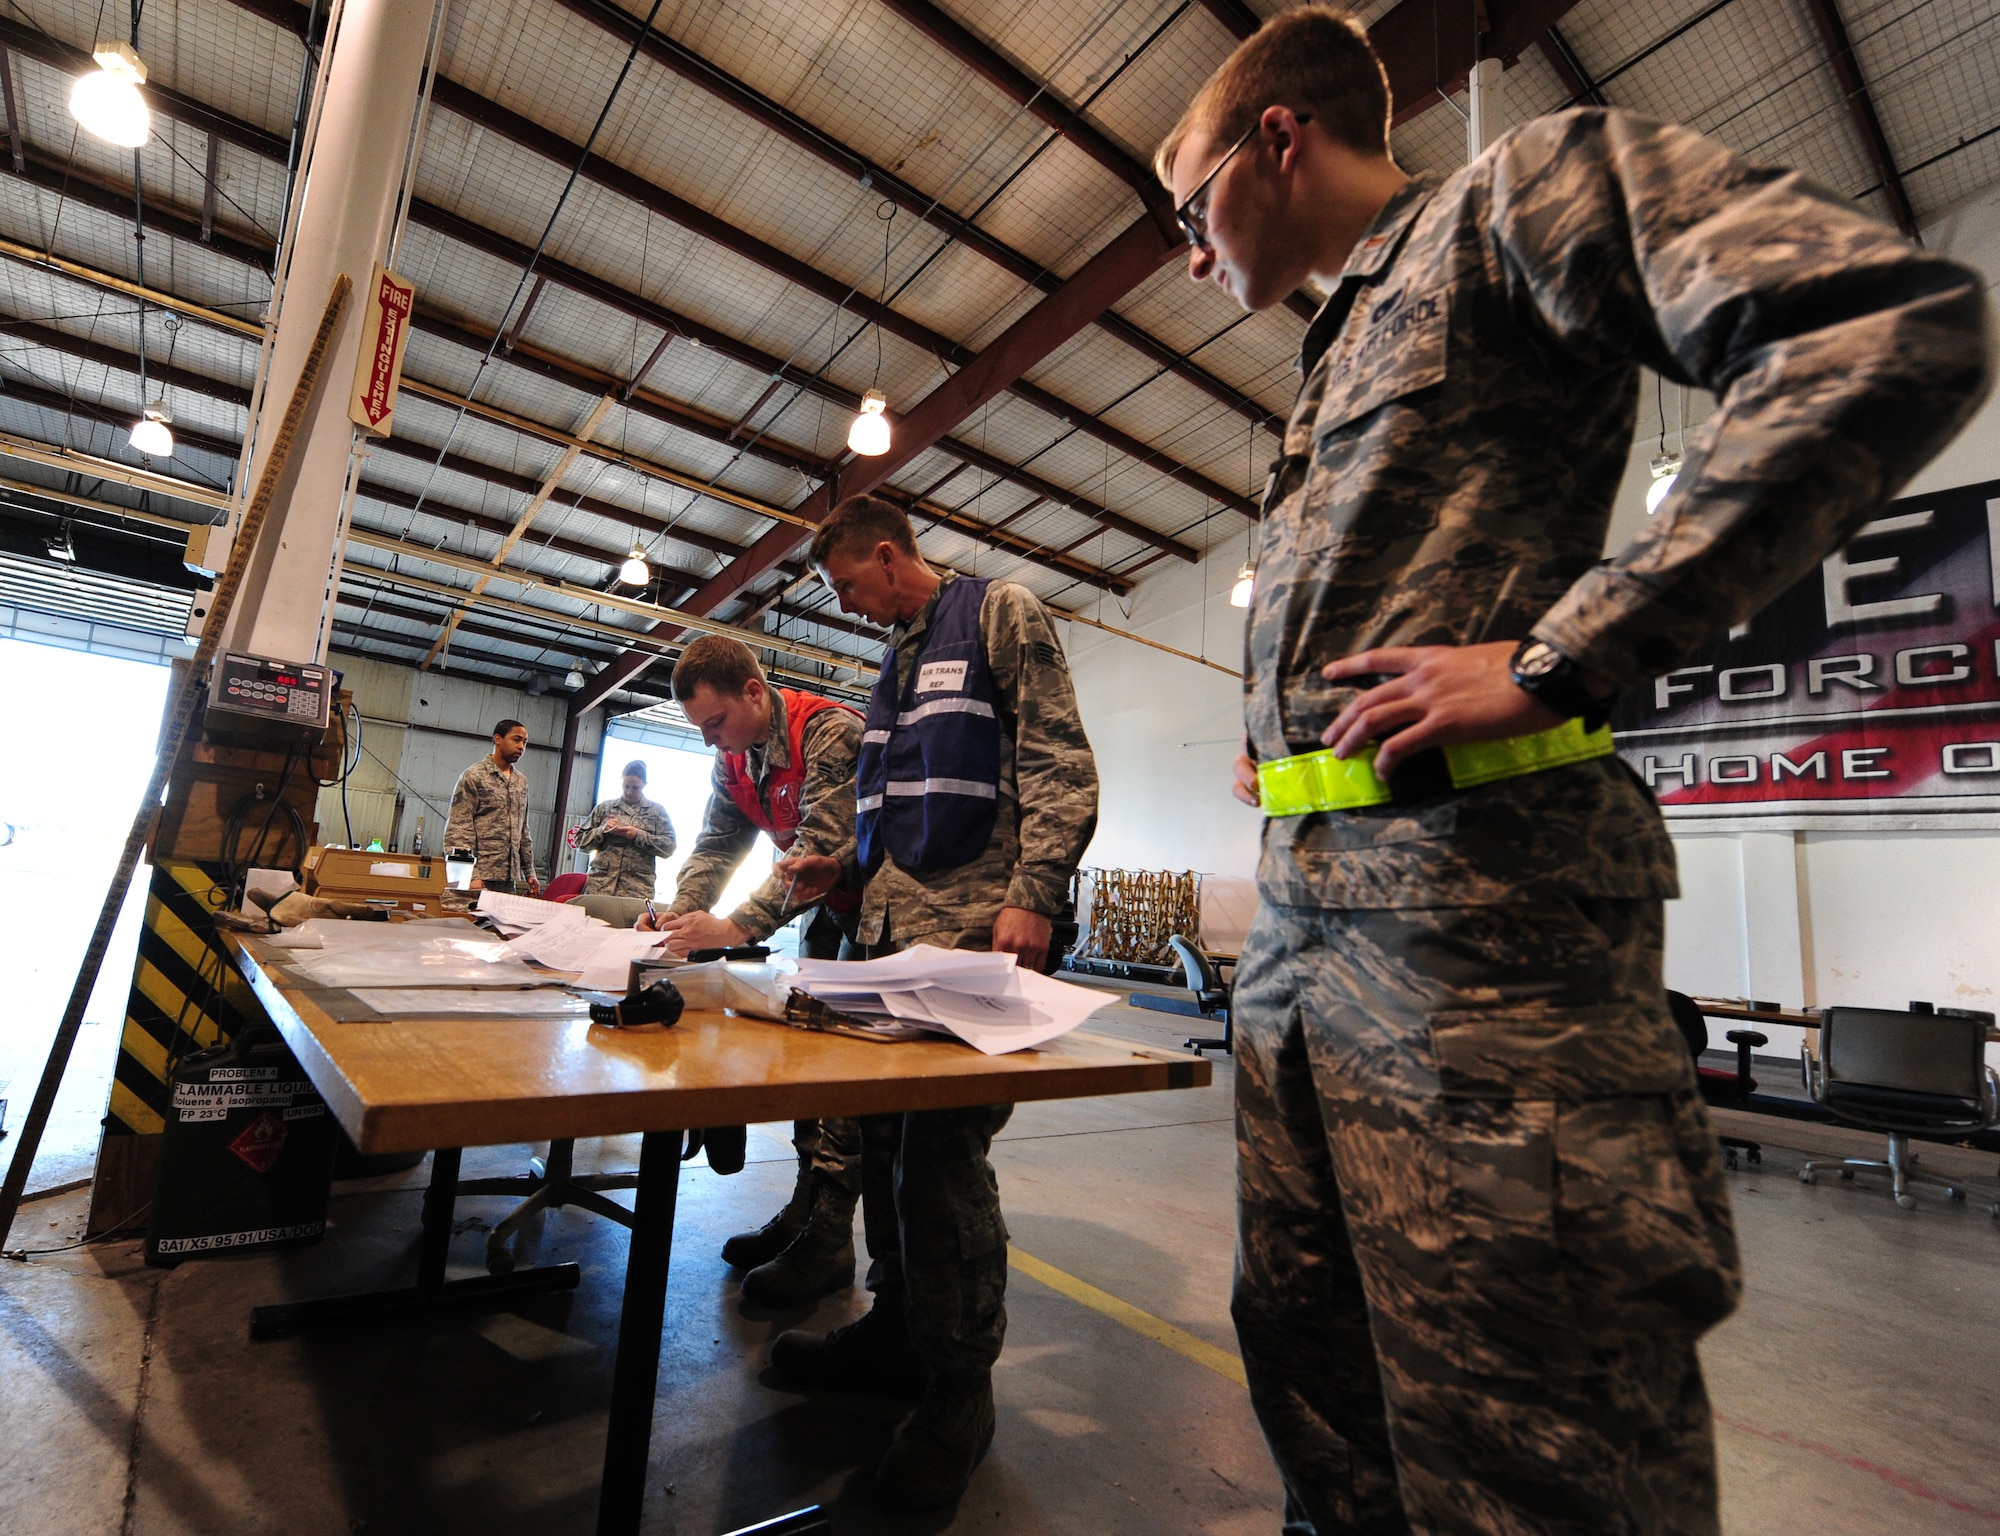 U.S. Air Force 2nd Lt. Alexander Clawson, a 509th Logistics Readiness Squadron (LRS) asset management specialist, left, Staff Sgt. Chris Taylor, the 509th LRS NCO in charge of deployment operations, center, and Airman 1st Class Brandon Tincher, a 509th Logistics Readiness Squadron materiel management specialist, examine cargo documentation during the CONSTANT VIGILANCE 16 exercise at Whiteman Air Force Base, Mo., April 12, 2016. Training and exercise are critical to Air Force Global Strike Command’s ability to respond quickly and effectively to real-world situations. (U.S. Air Force photo by Airman 1st Class Keenan Berry)